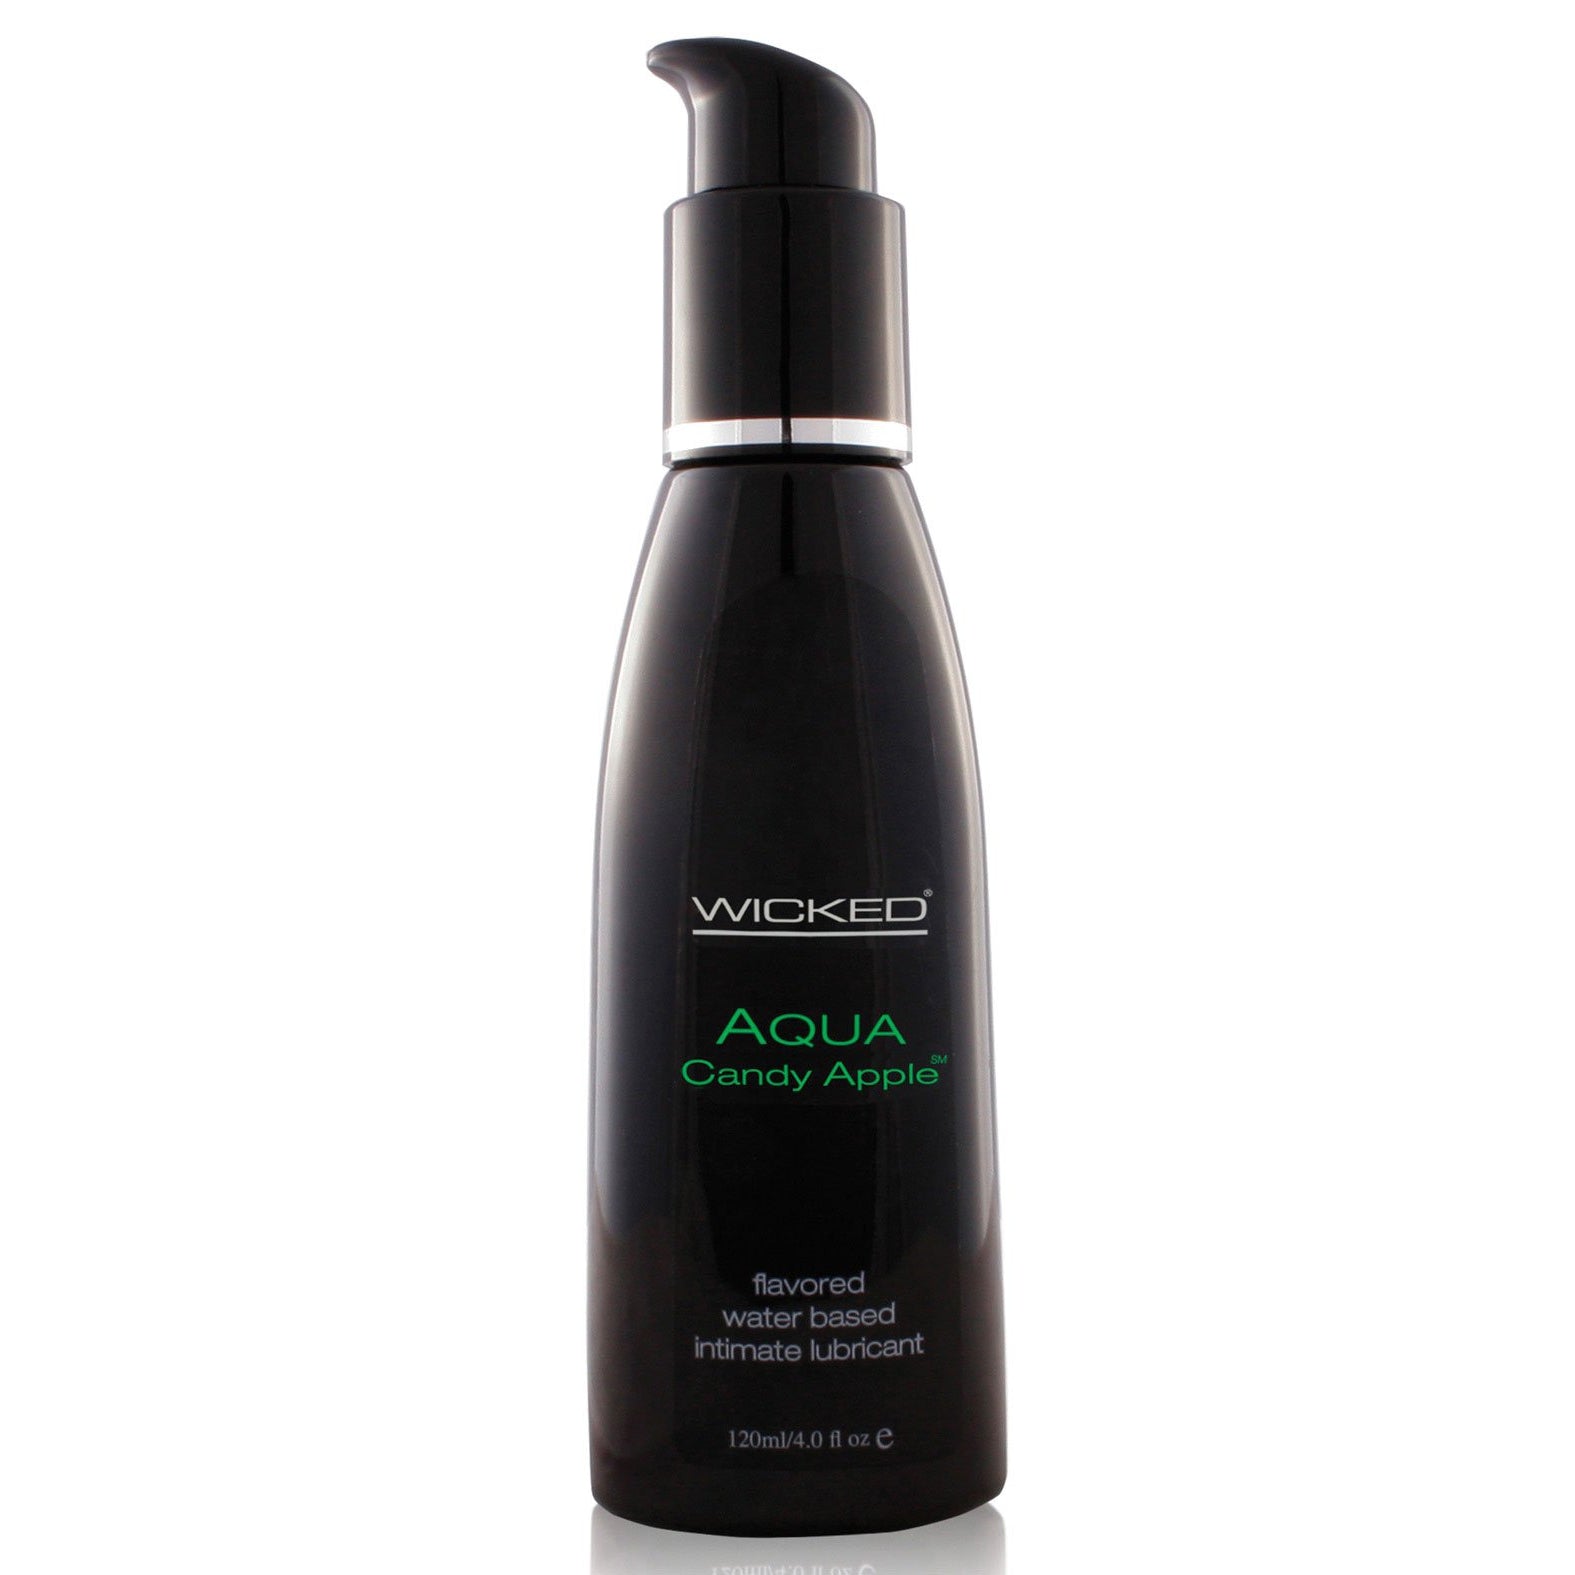 Wicked Sensual Care Aqua Water Based Ludricant - Flavored